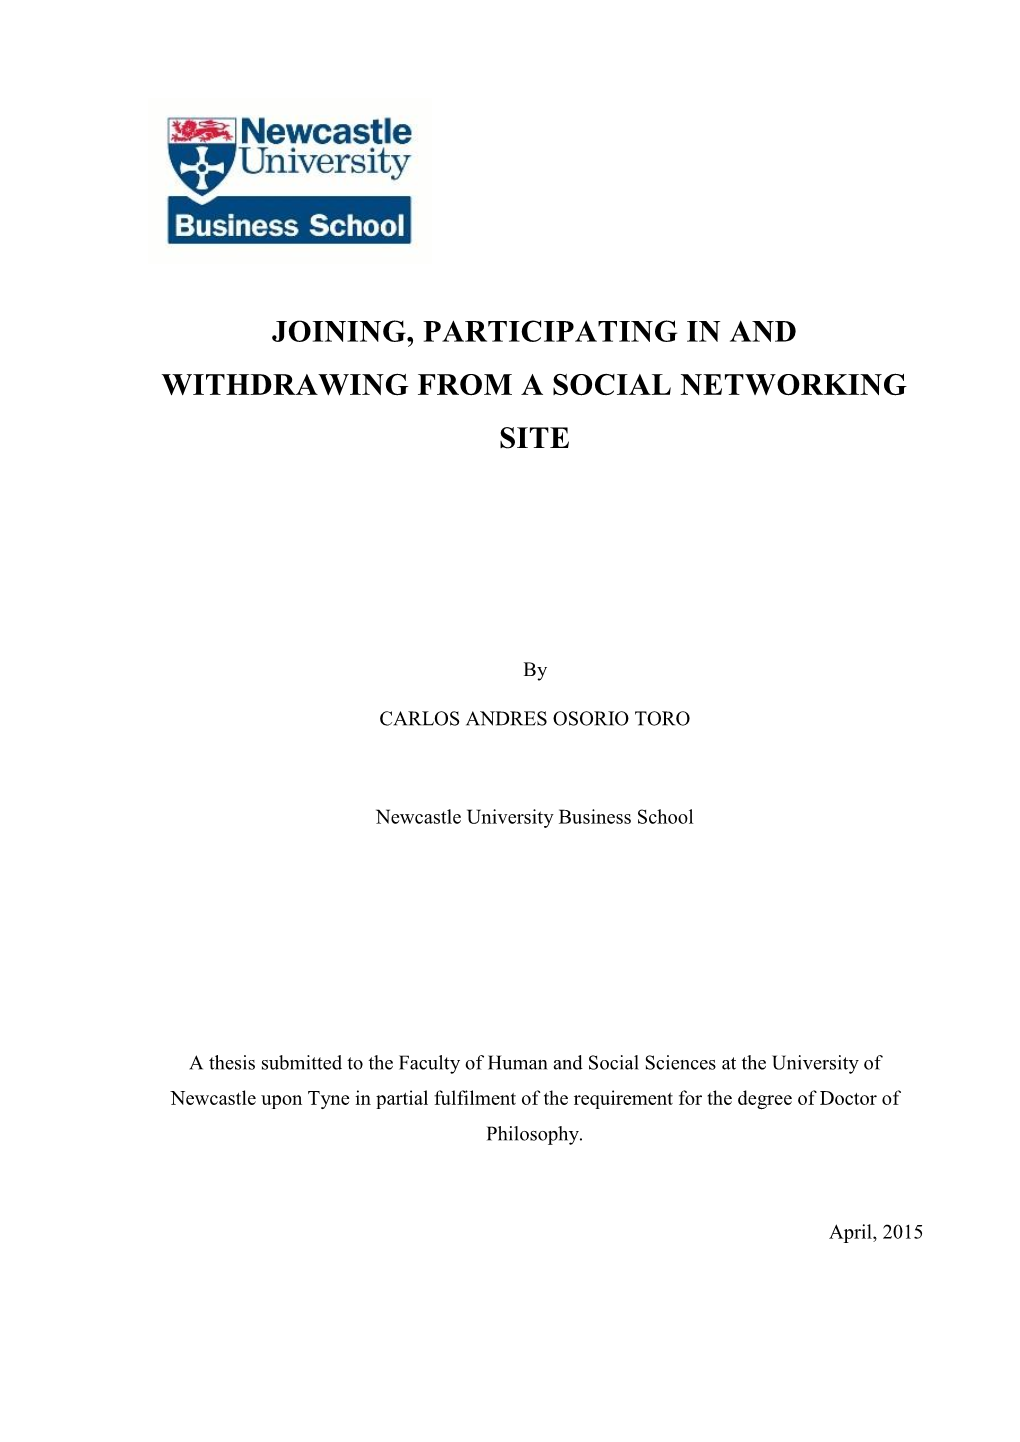 Joining, Participating in and Withdrawing from a Social Networking Site